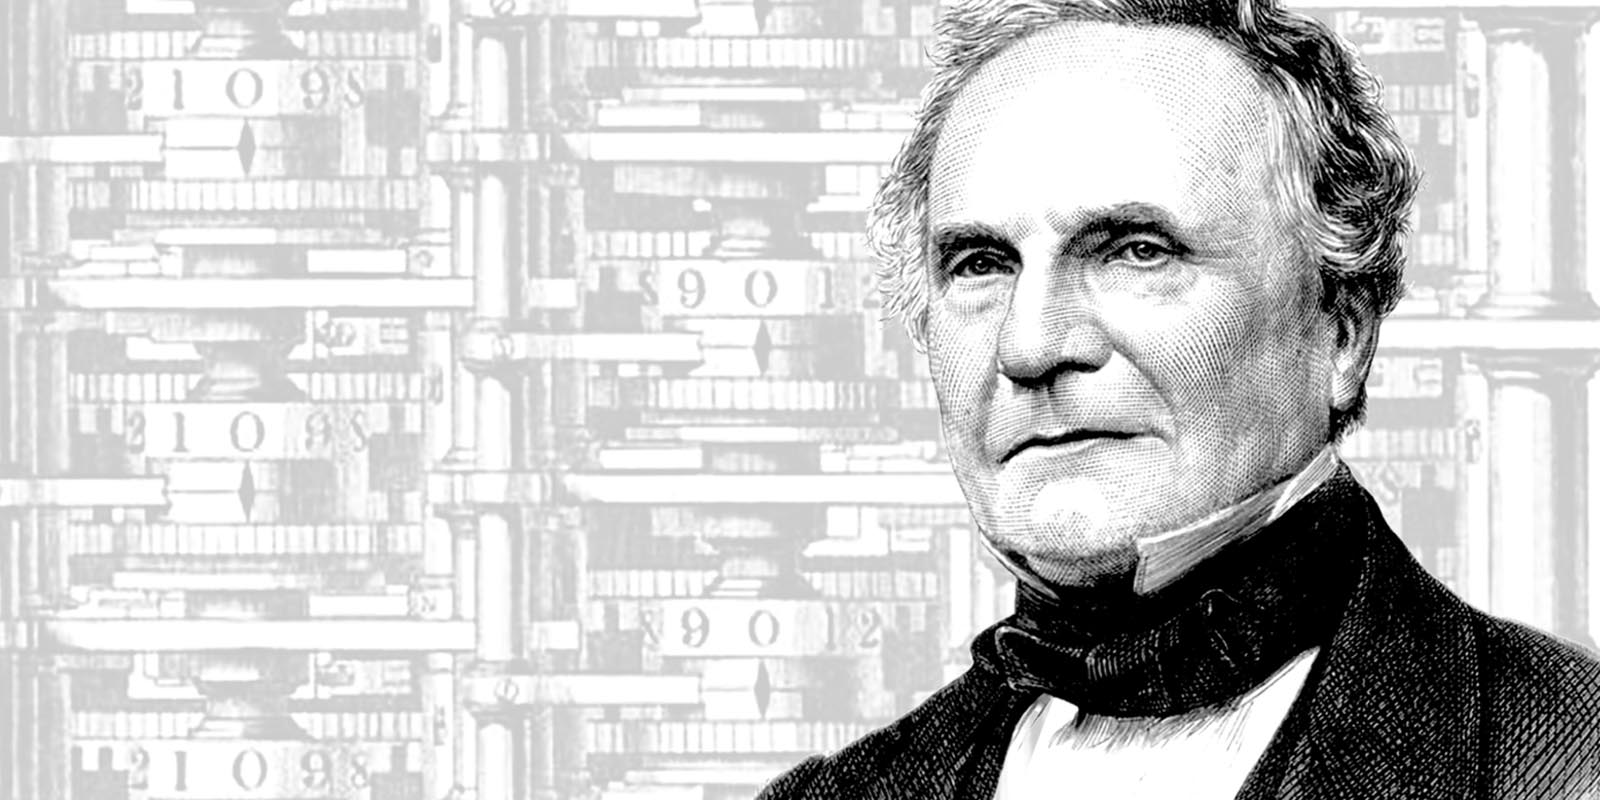 Meet the Maker - Charles Babbage